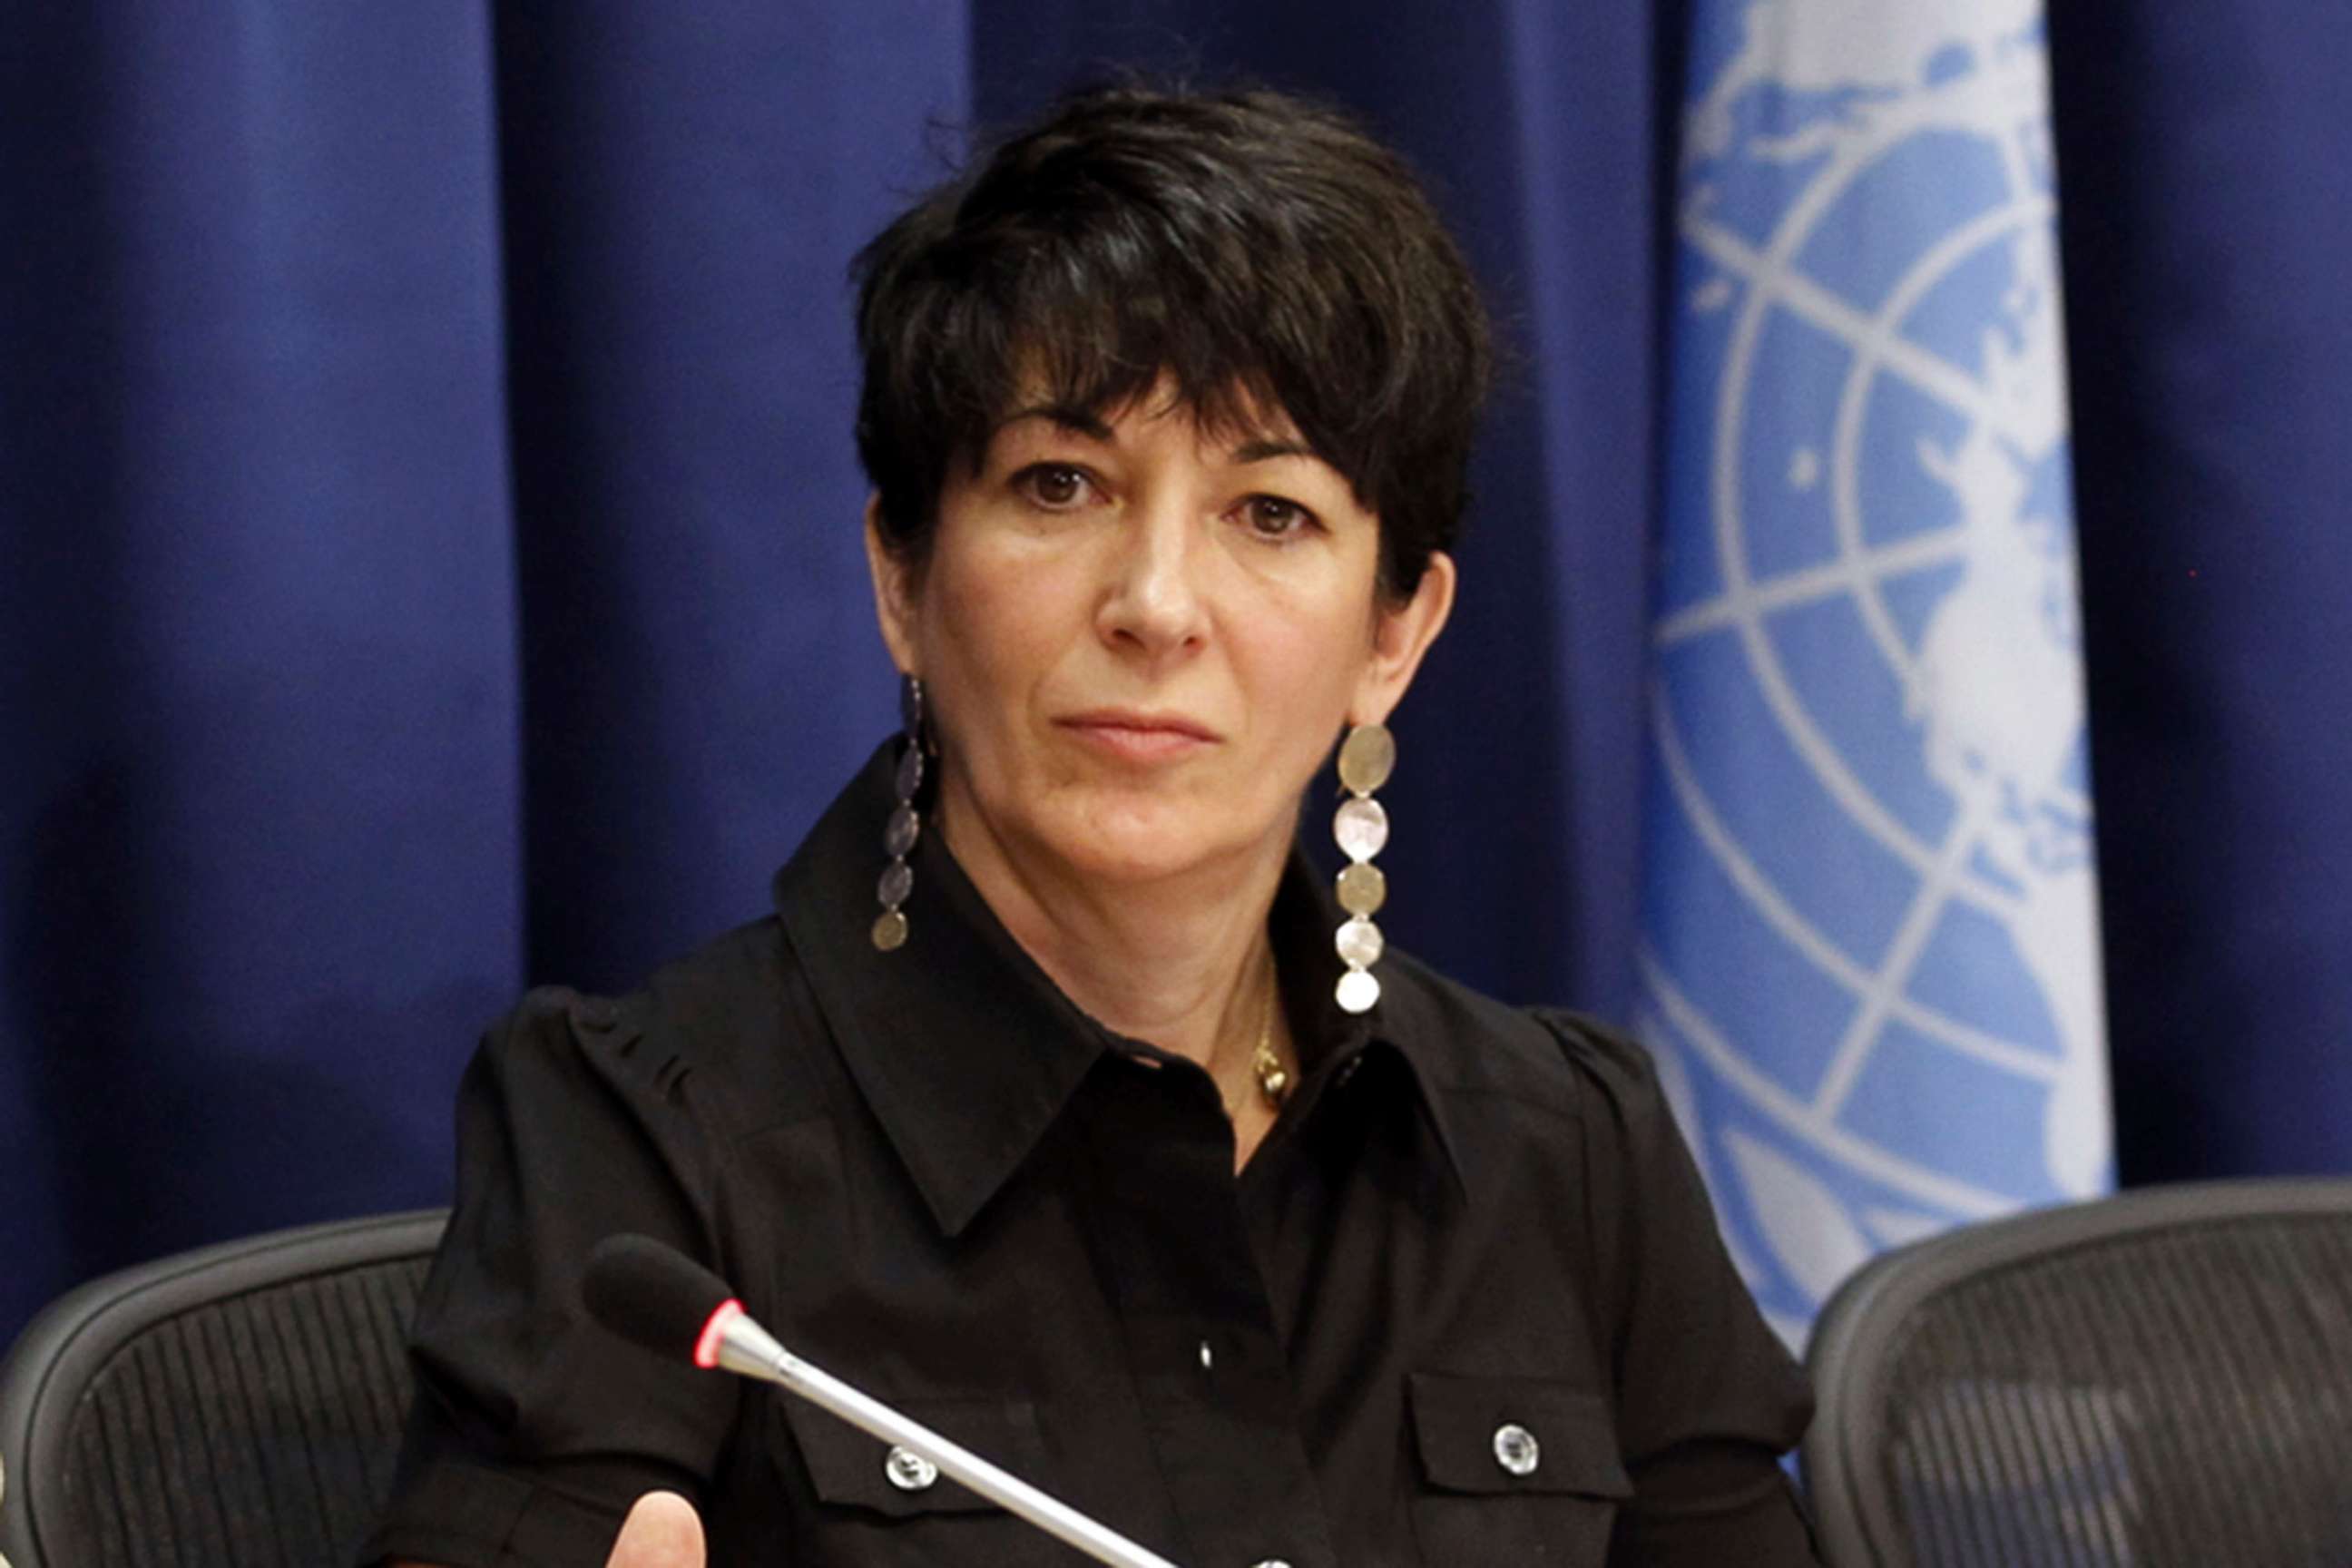 PHOTO: In this June 25, 2013, file photo, Ghislaine Maxwell attends a press conference on the Issue of Oceans in Sustainable Development Goals, at United Nations headquarters in New York.